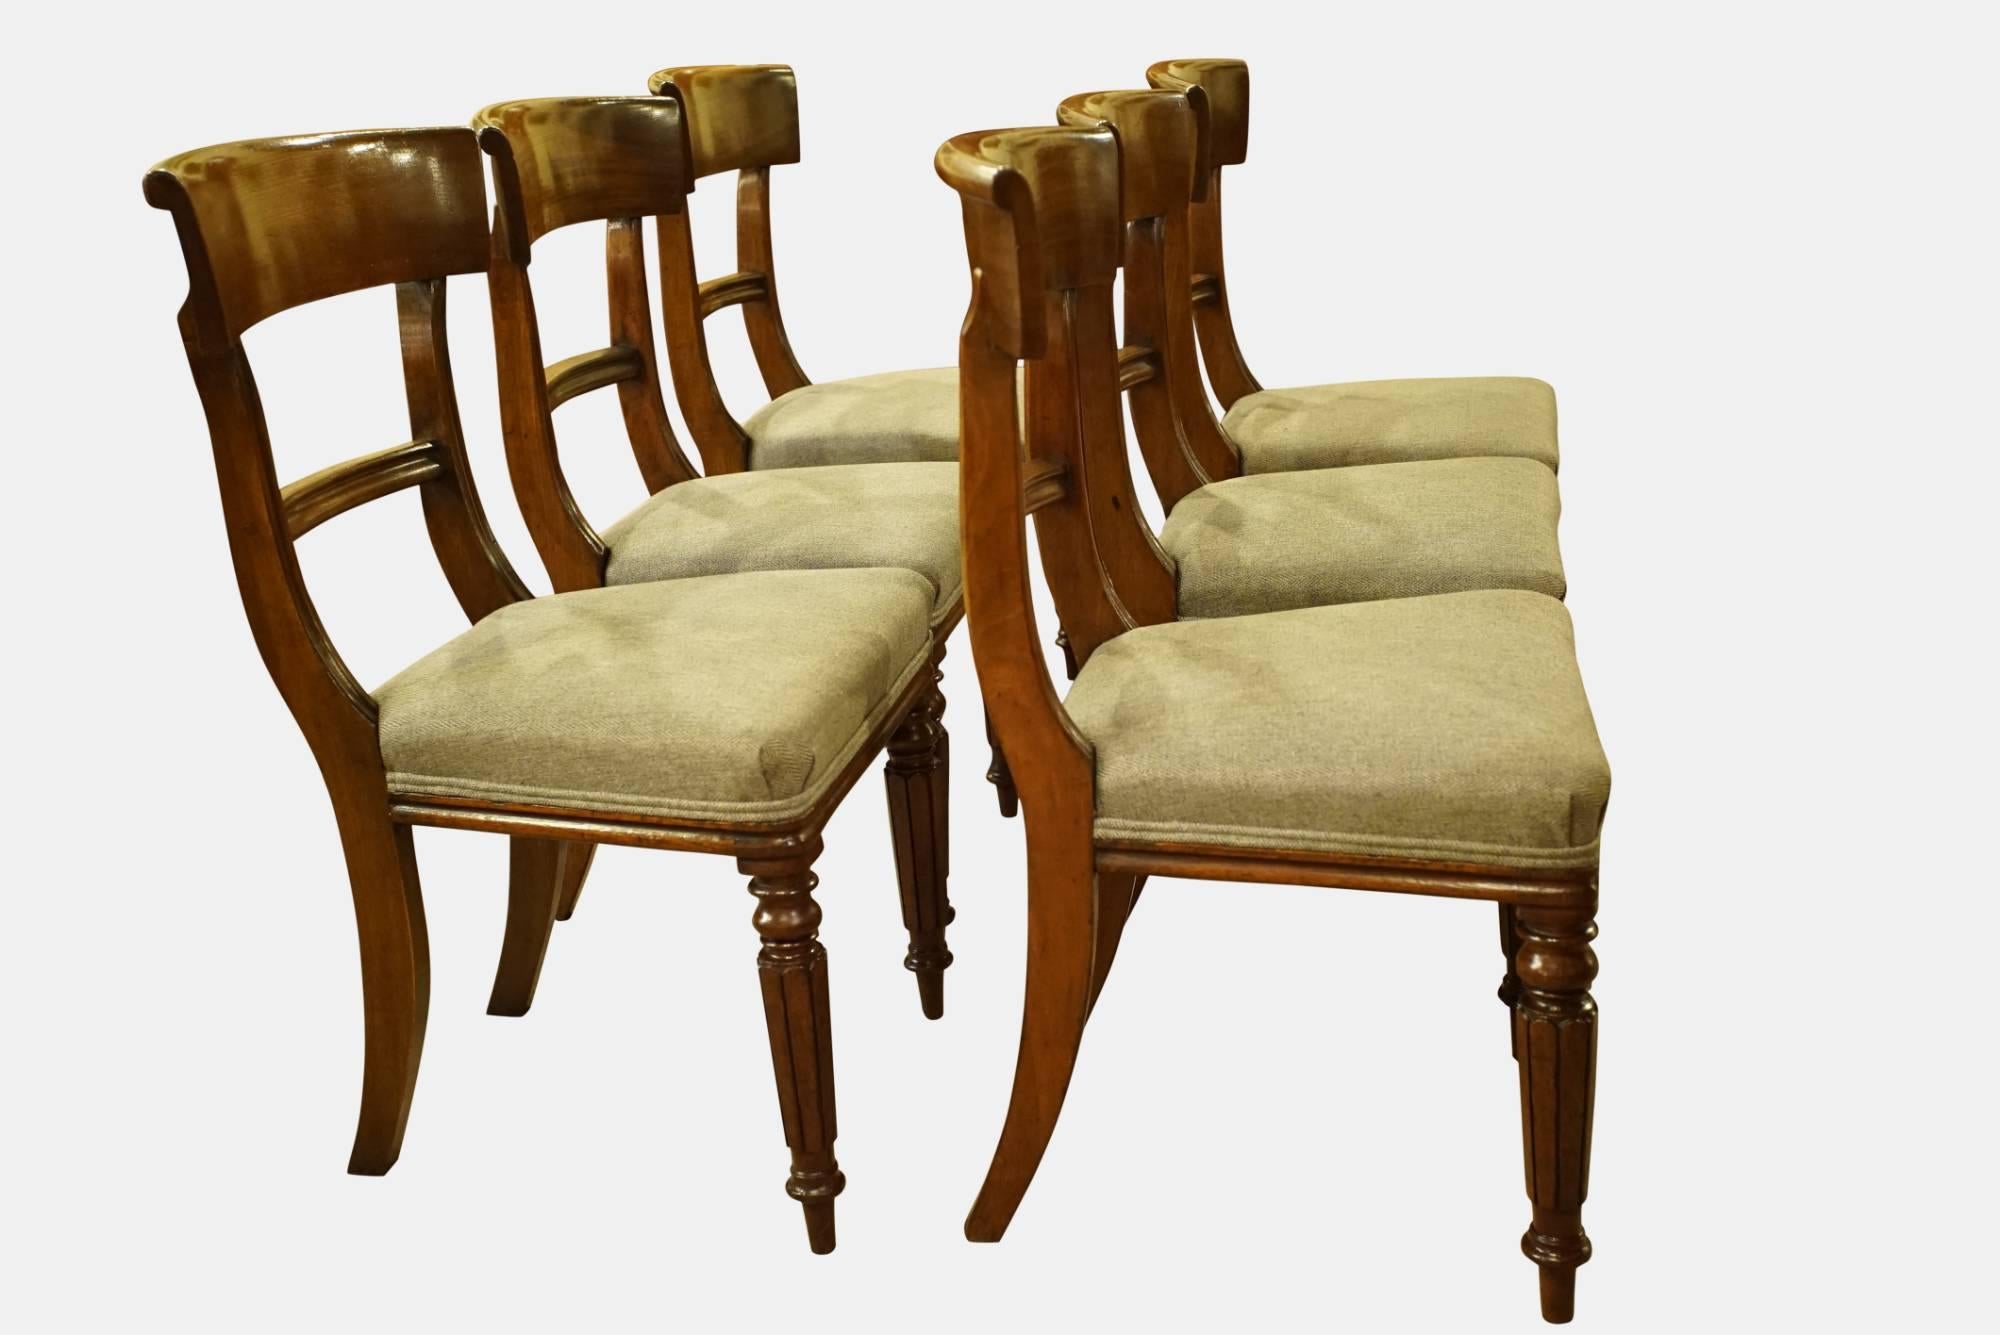 A set of six 19th century Mahogany chairs in original condition with no breaks or brackets,


circa 1830.